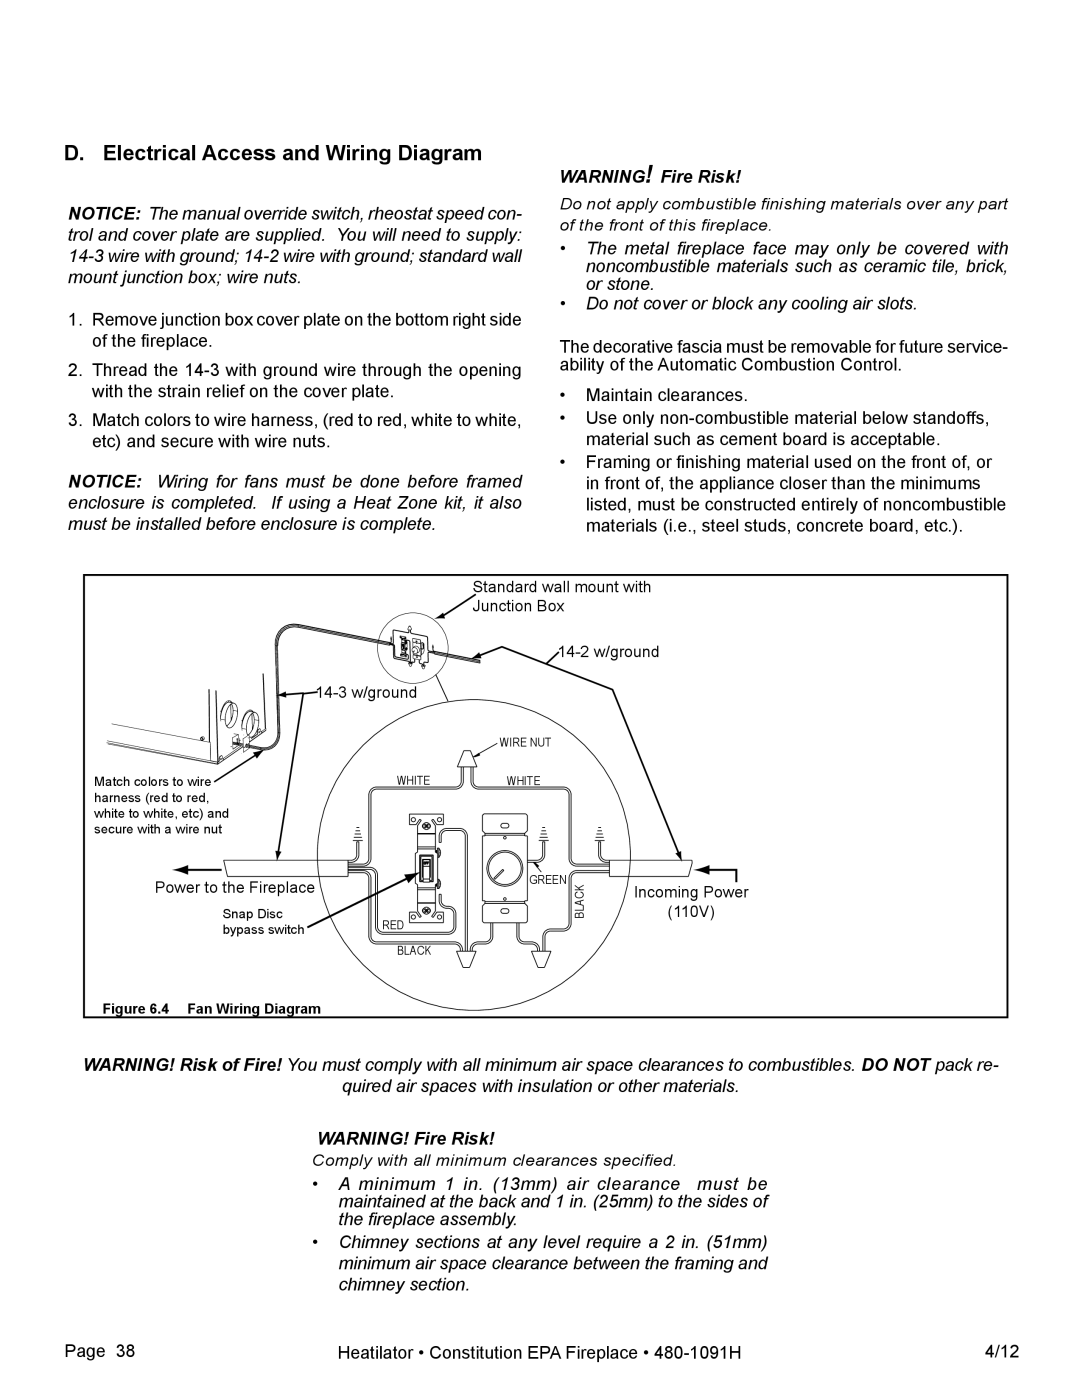 Heatiator C40 owner manual D. Electrical Access and Wiring Diagram, WARNING! Fire Risk 